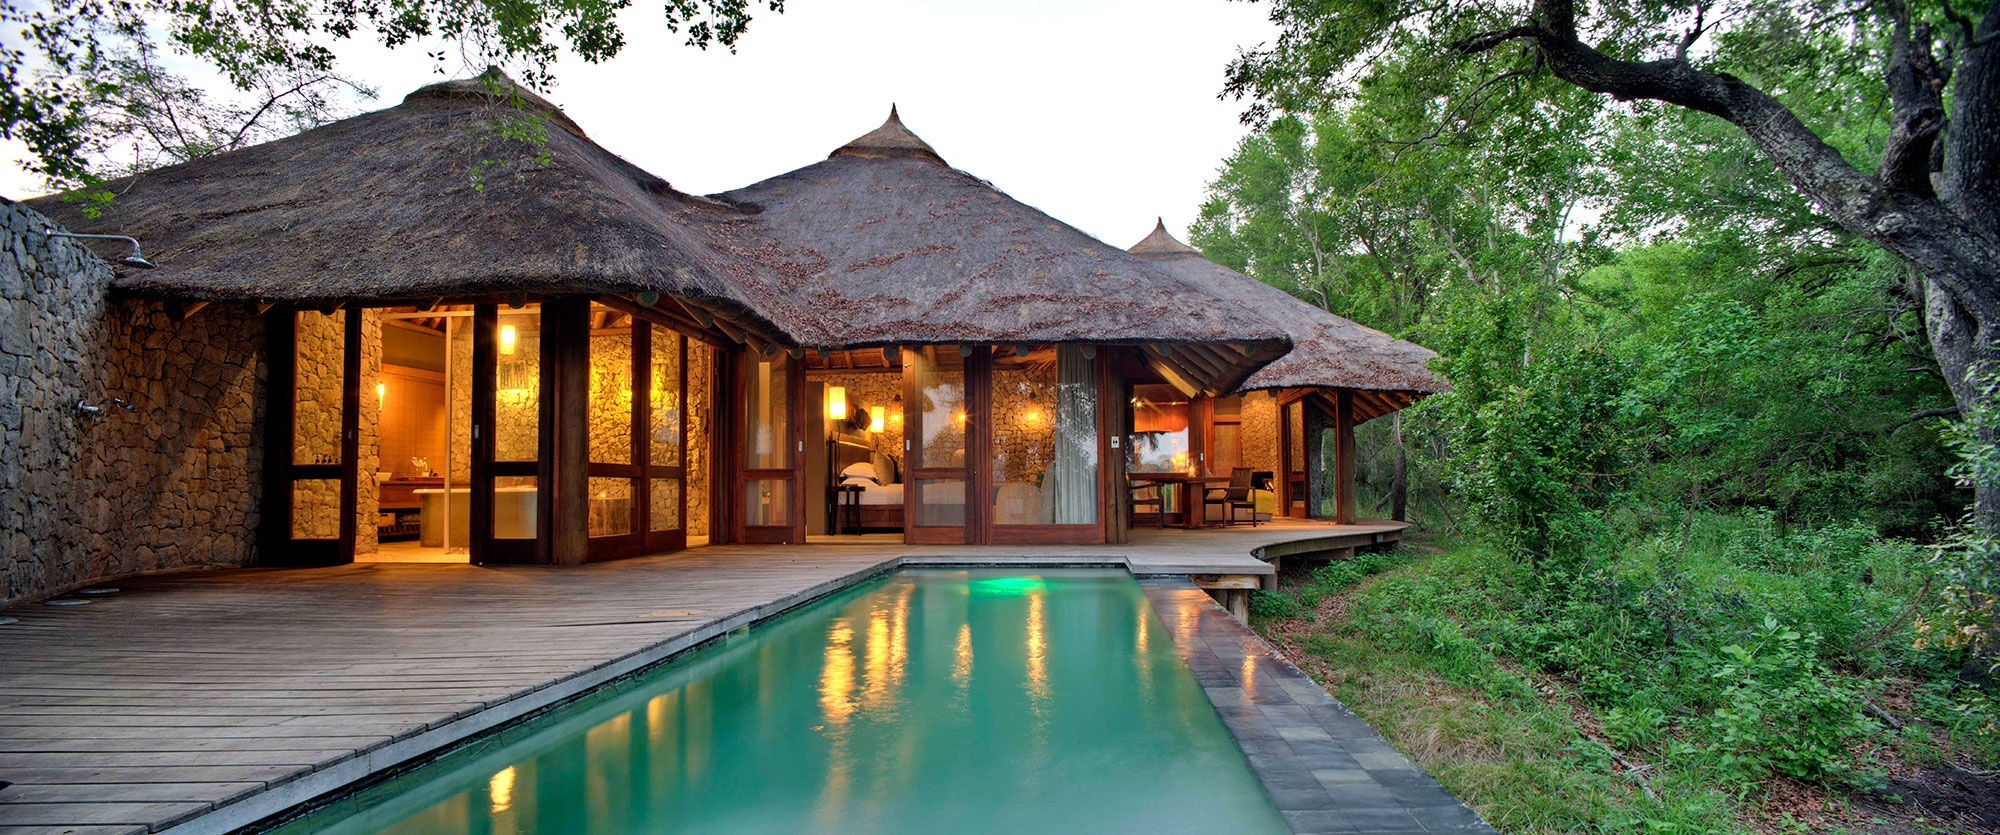 Africa Travel Agency Luxury Africa trips and vacation packages